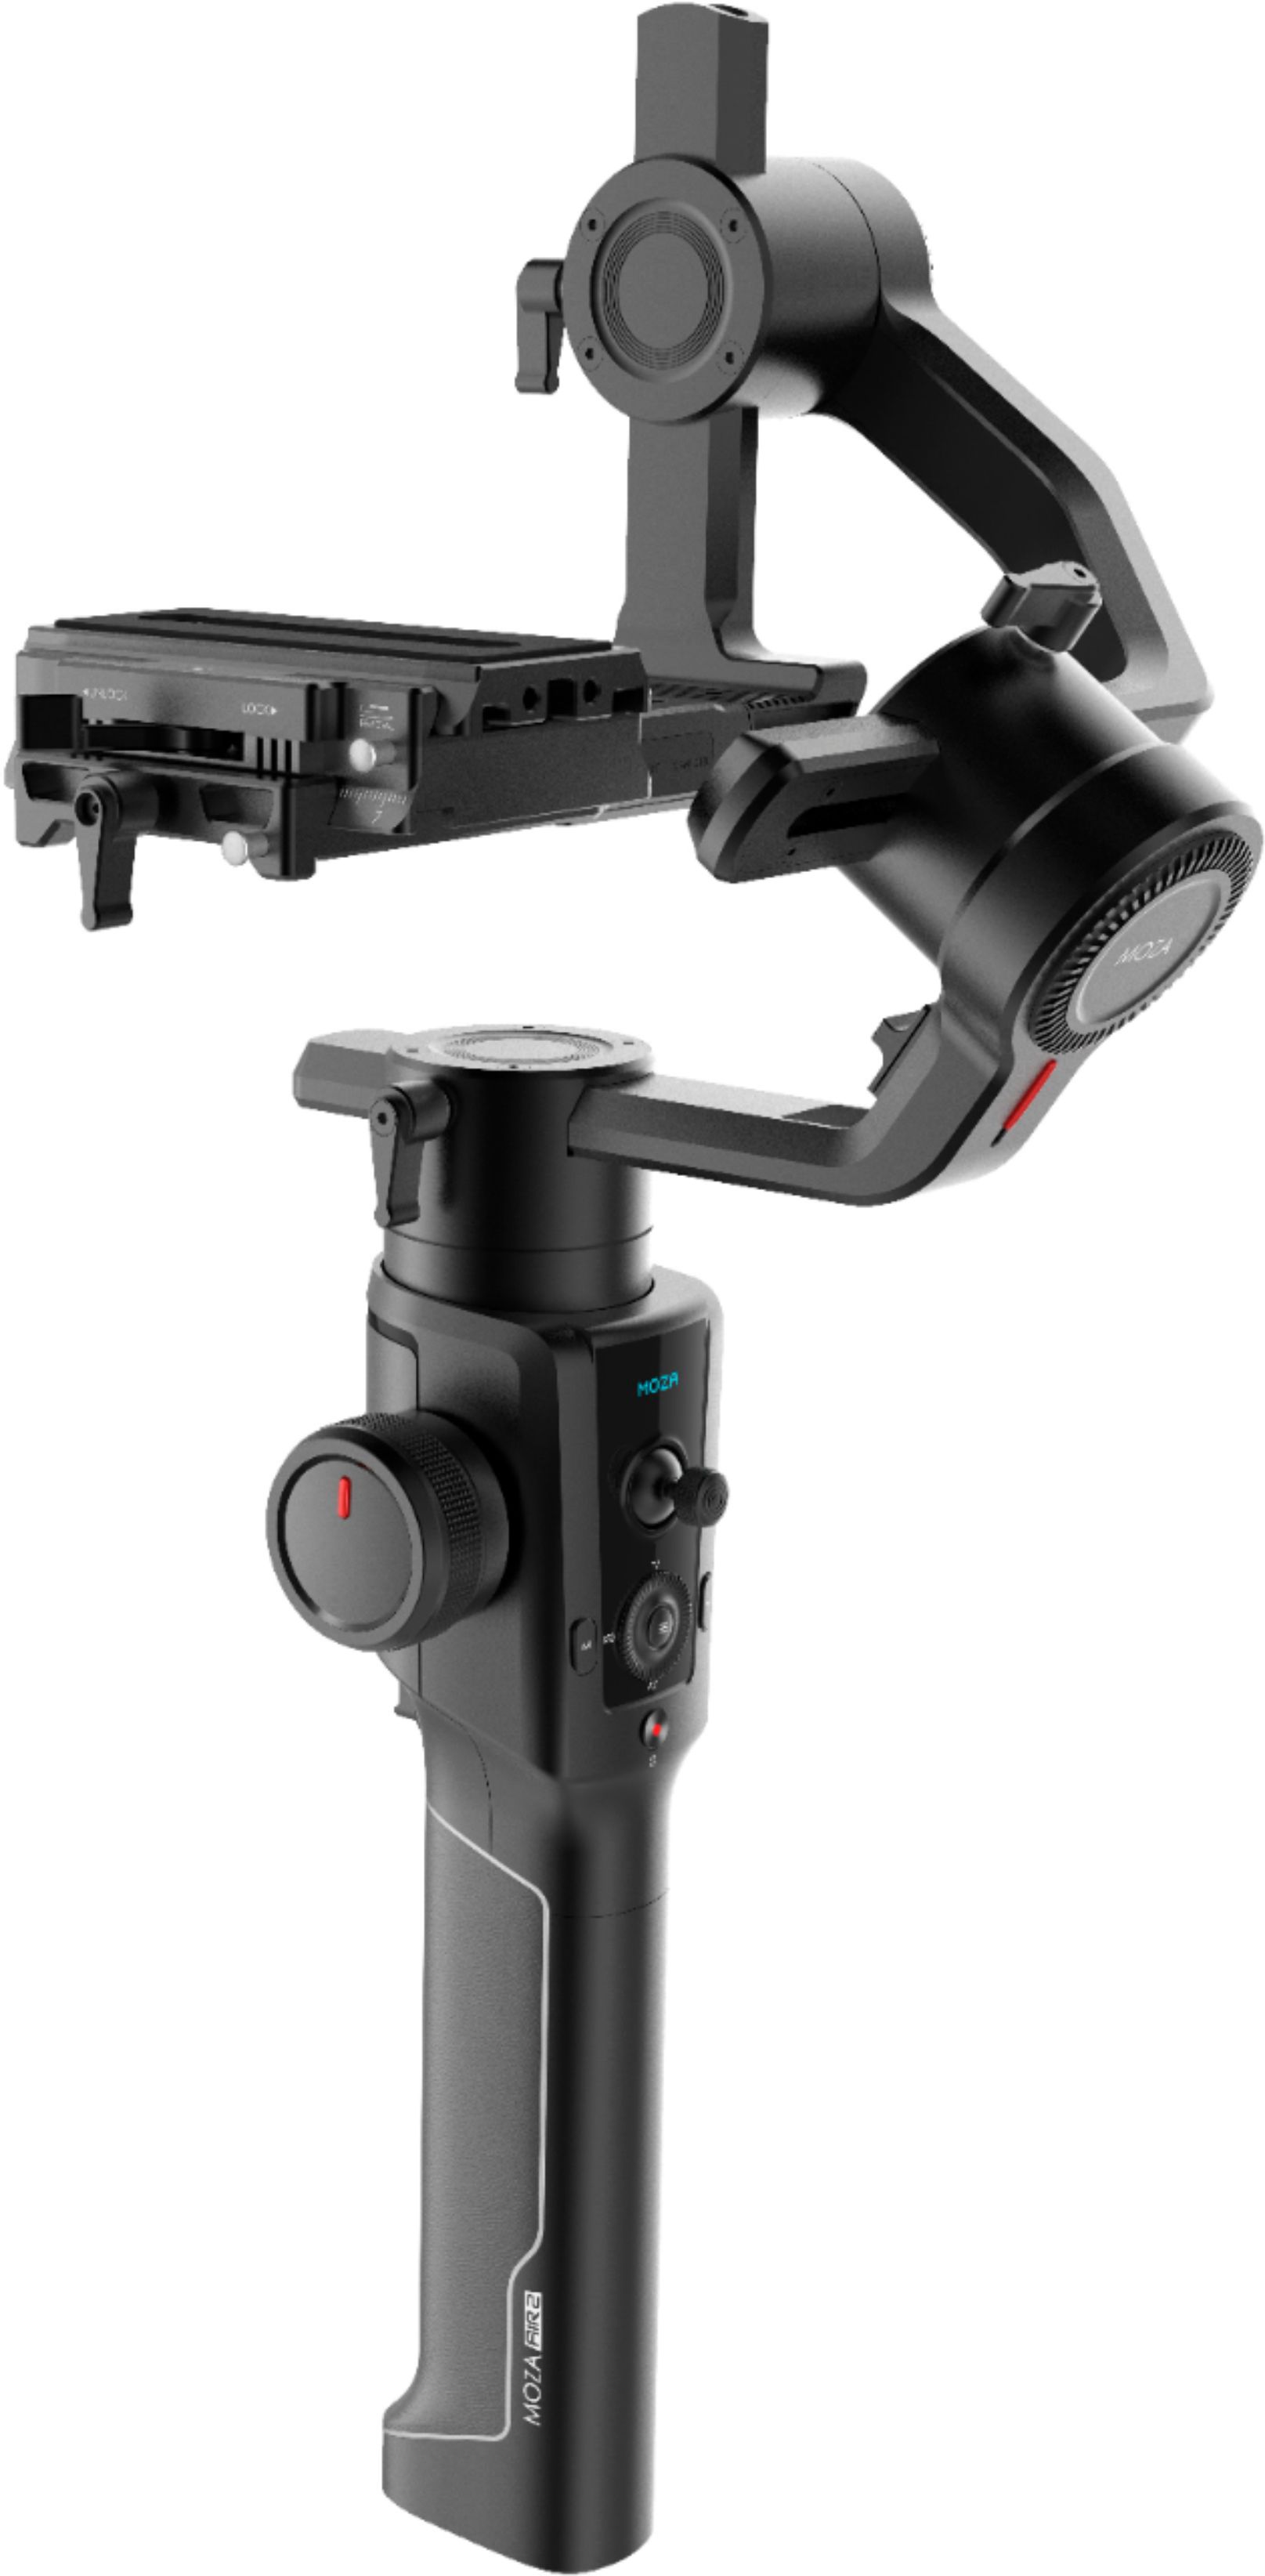 Left View: DJI OM 5 Smartphone 3-Axis Gimbal Stabilizer